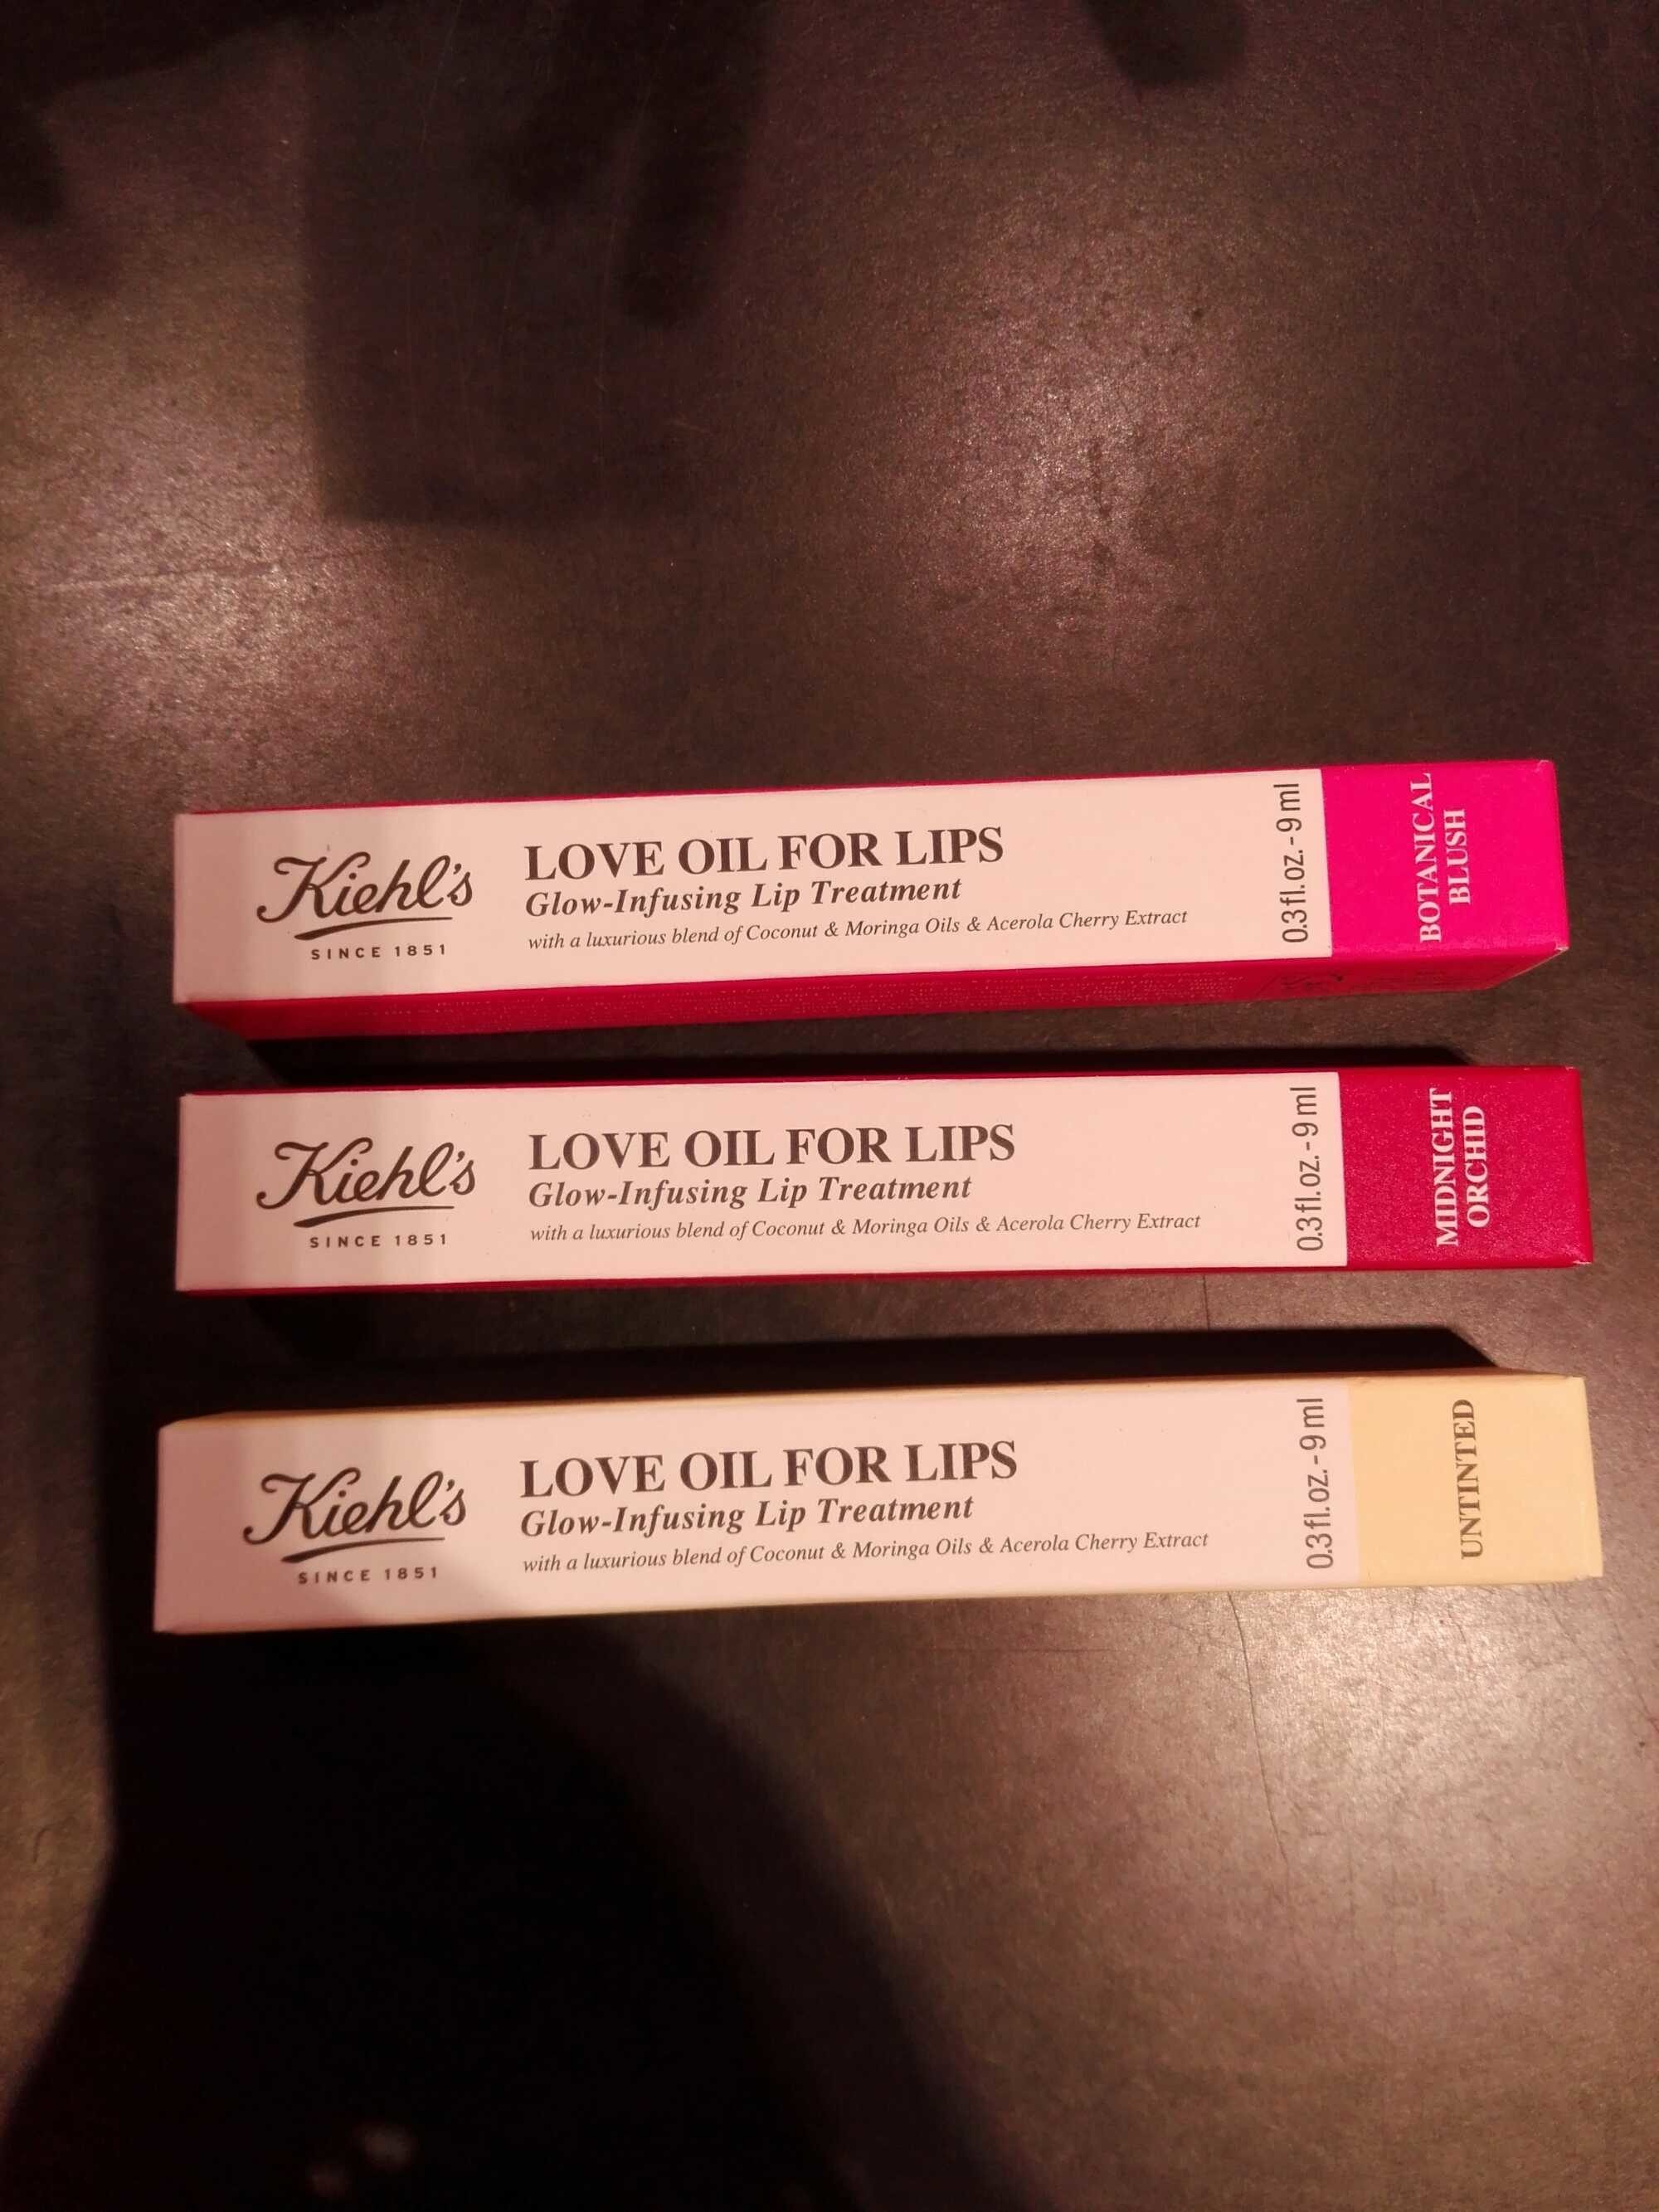 love oil for lips - Tuote - fr